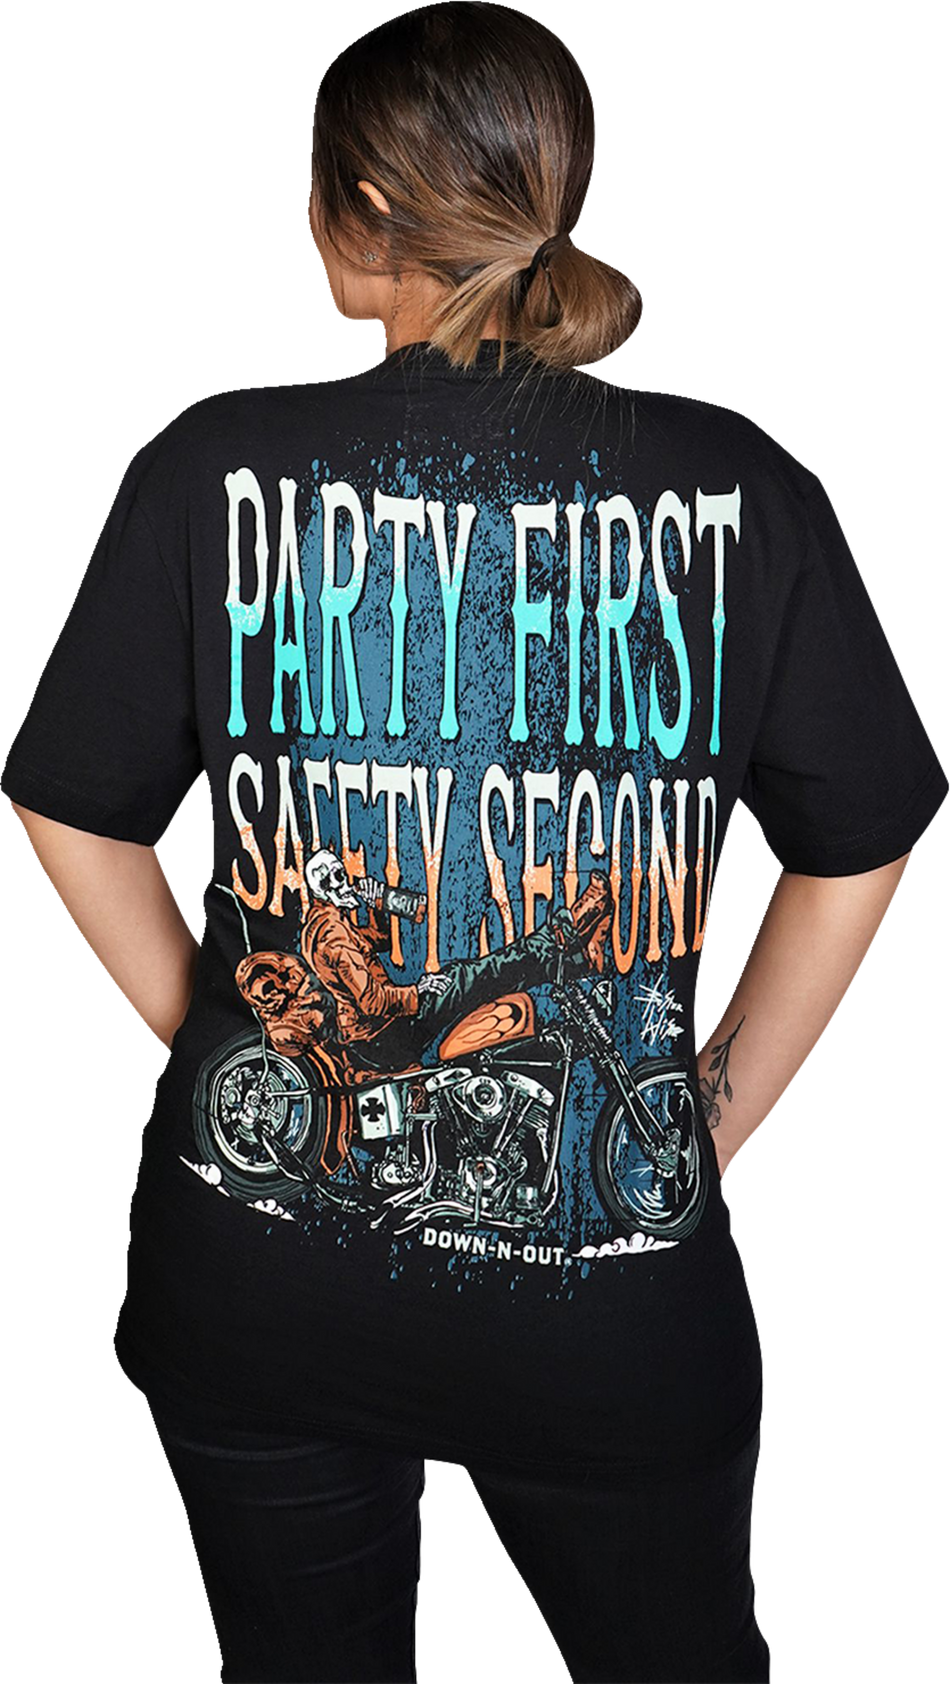 LETHAL THREAT Down-N-Out Party First Safety Second - Black - Large DT10043L